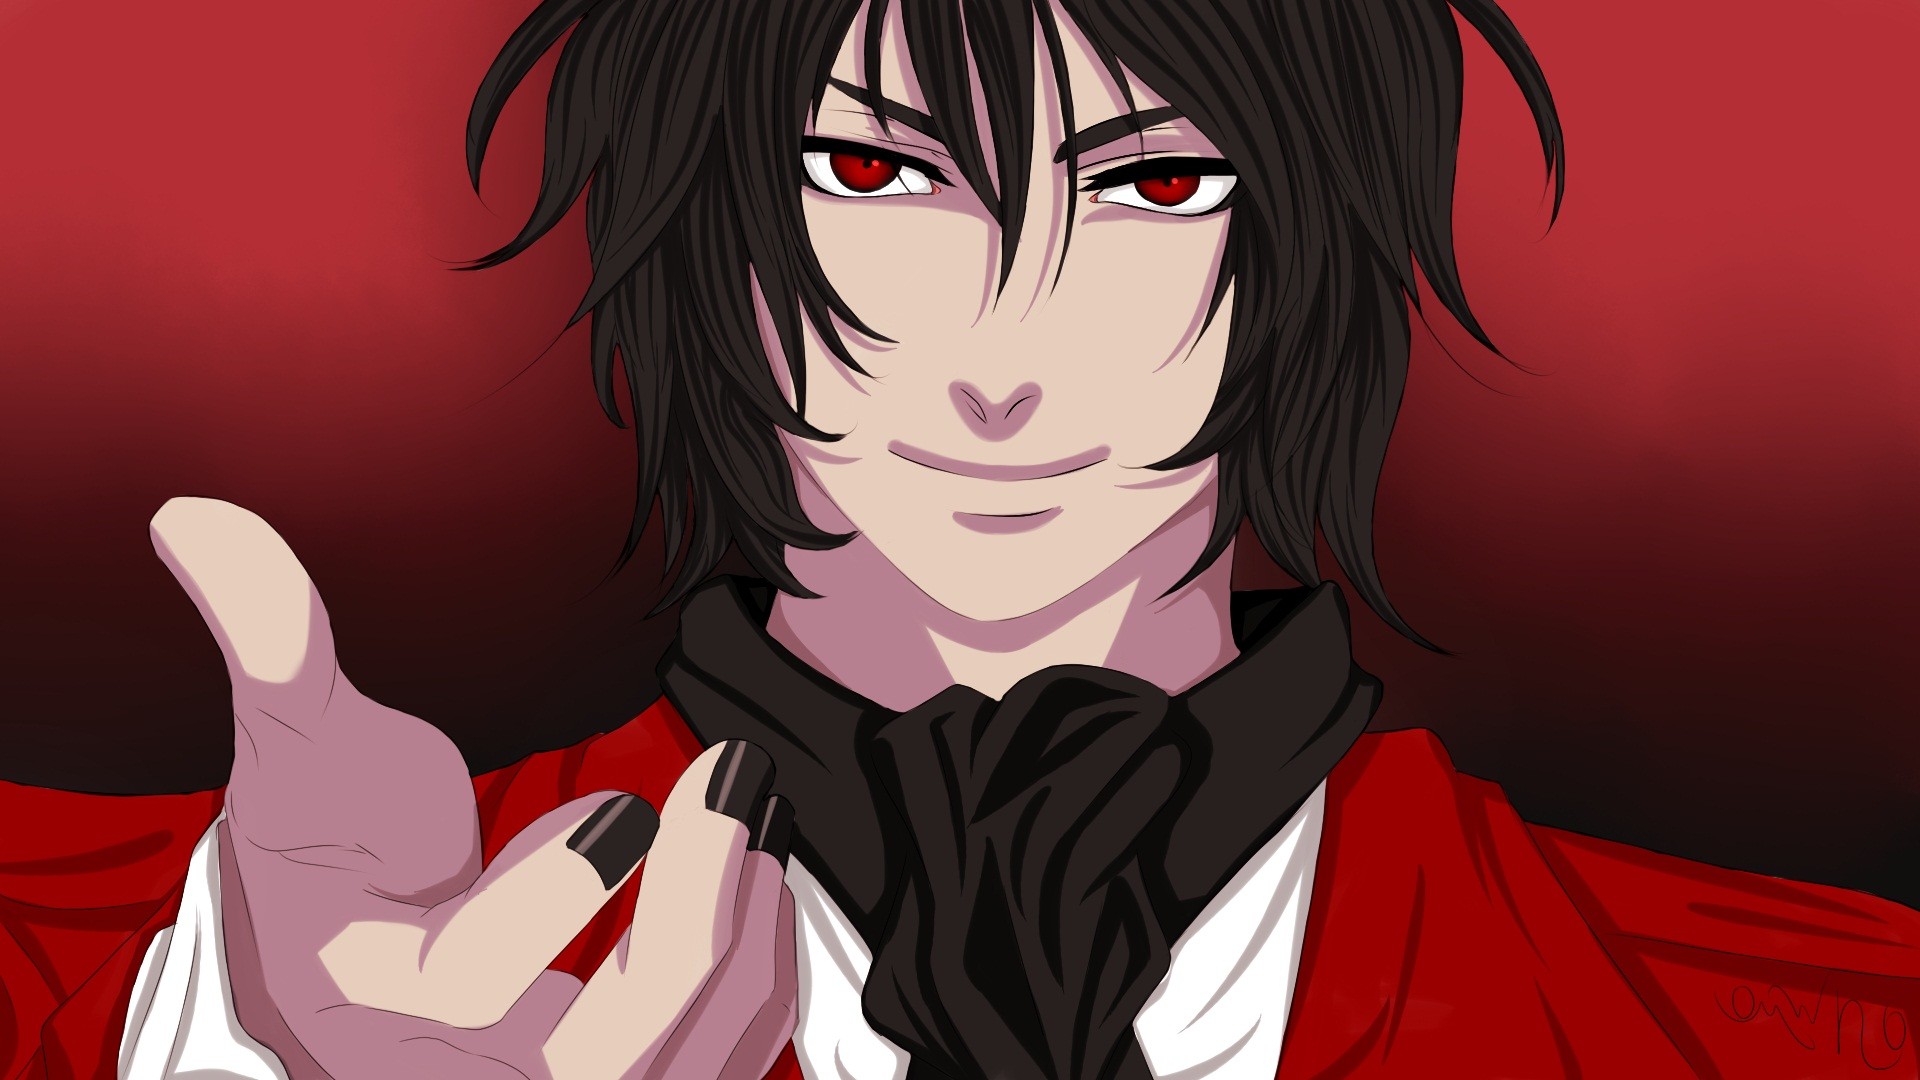 Alucard Hellsing with Blue Hair - Google Search - wide 1